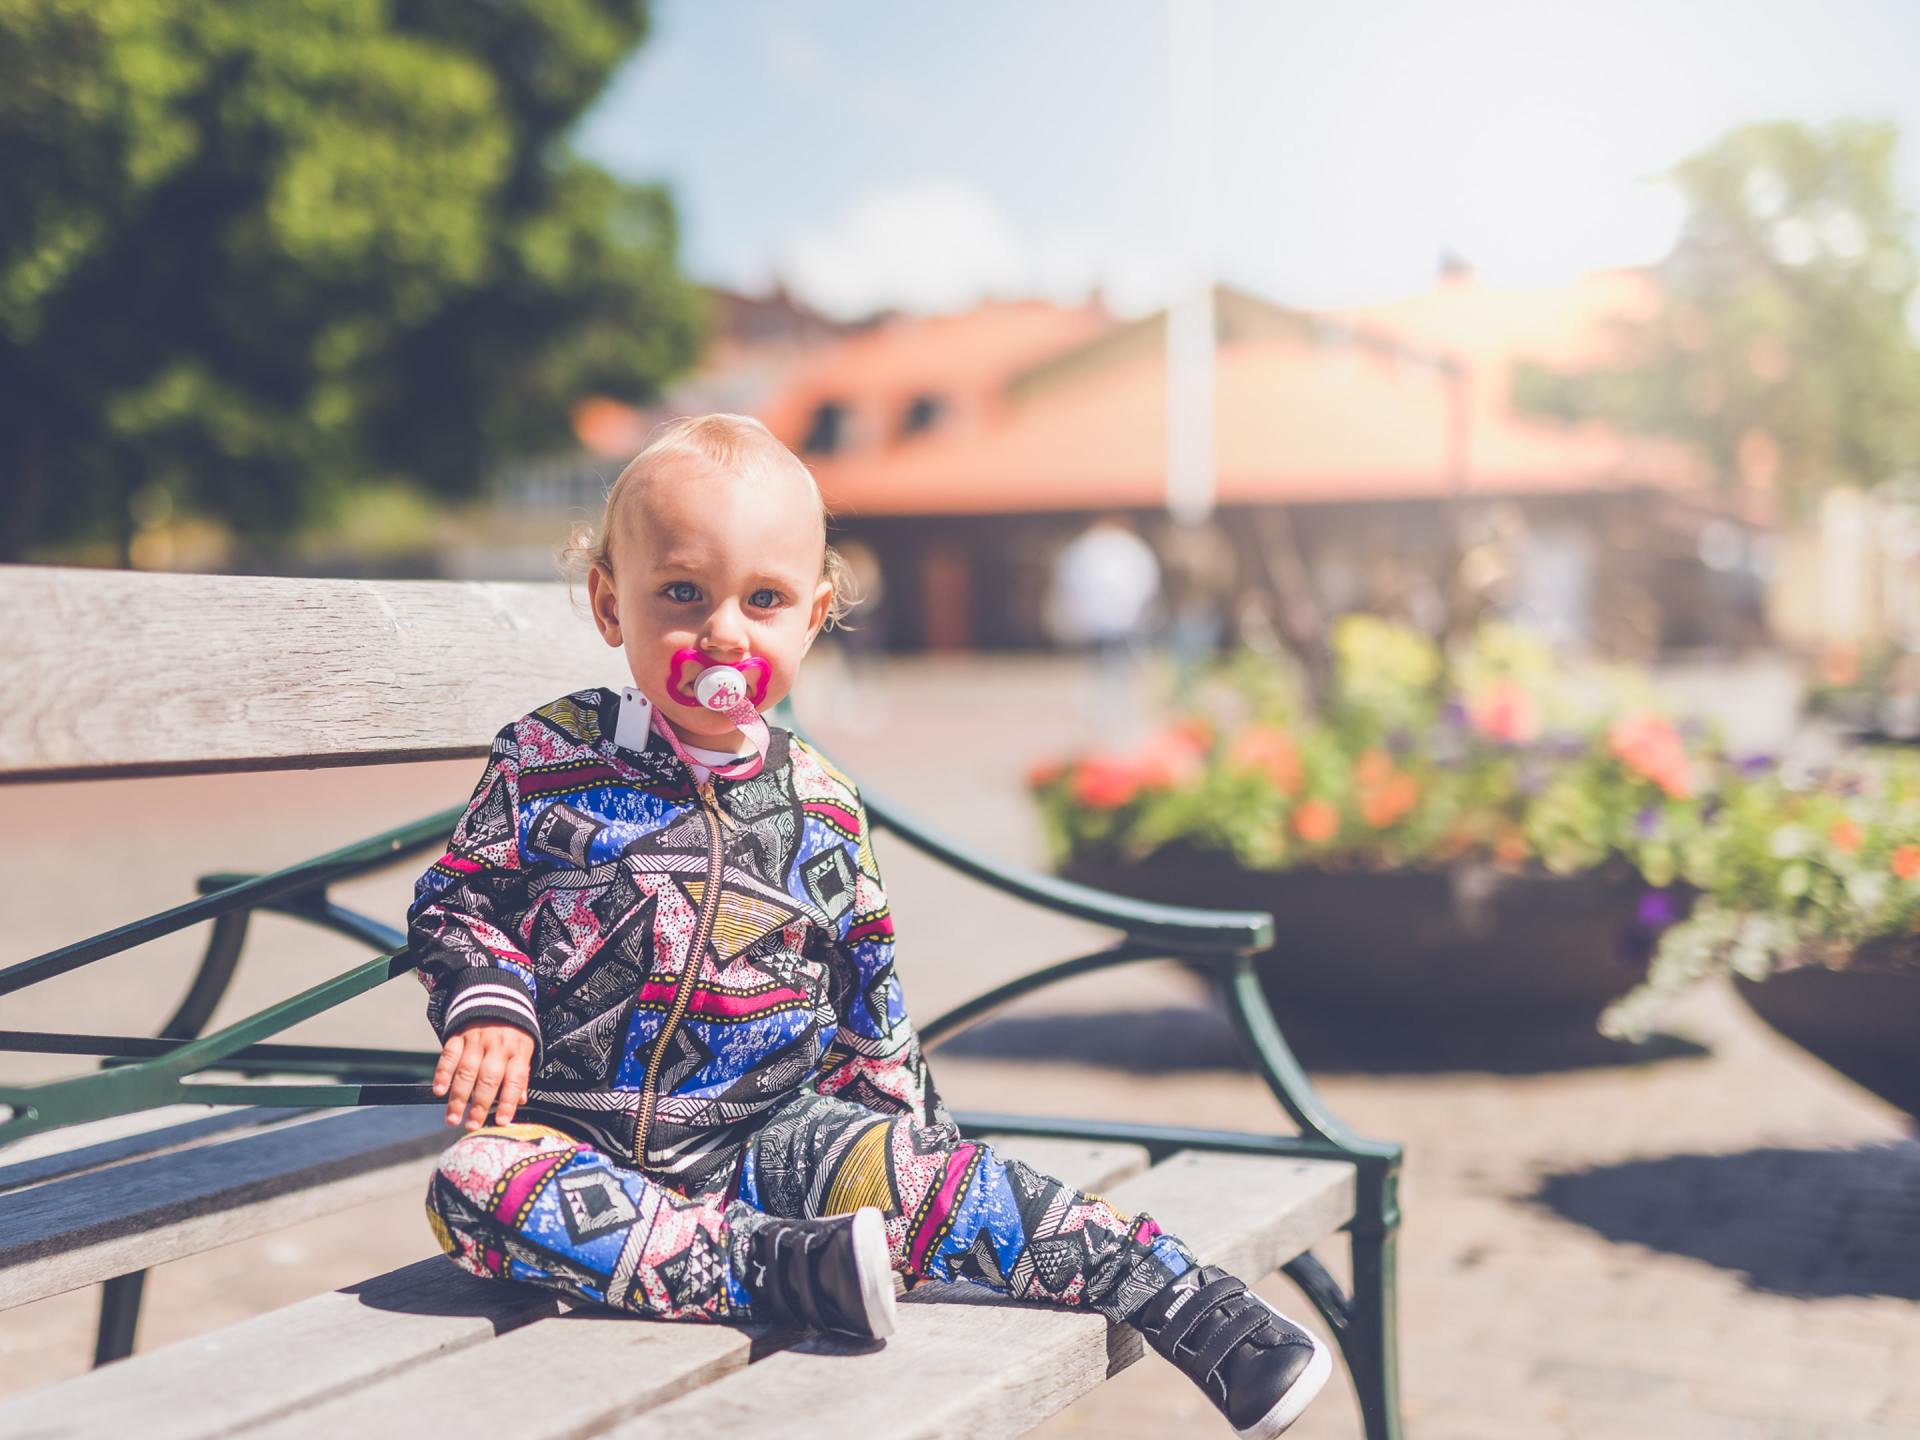 Does Pacifier Use Affect a Baby’s Dental Development?